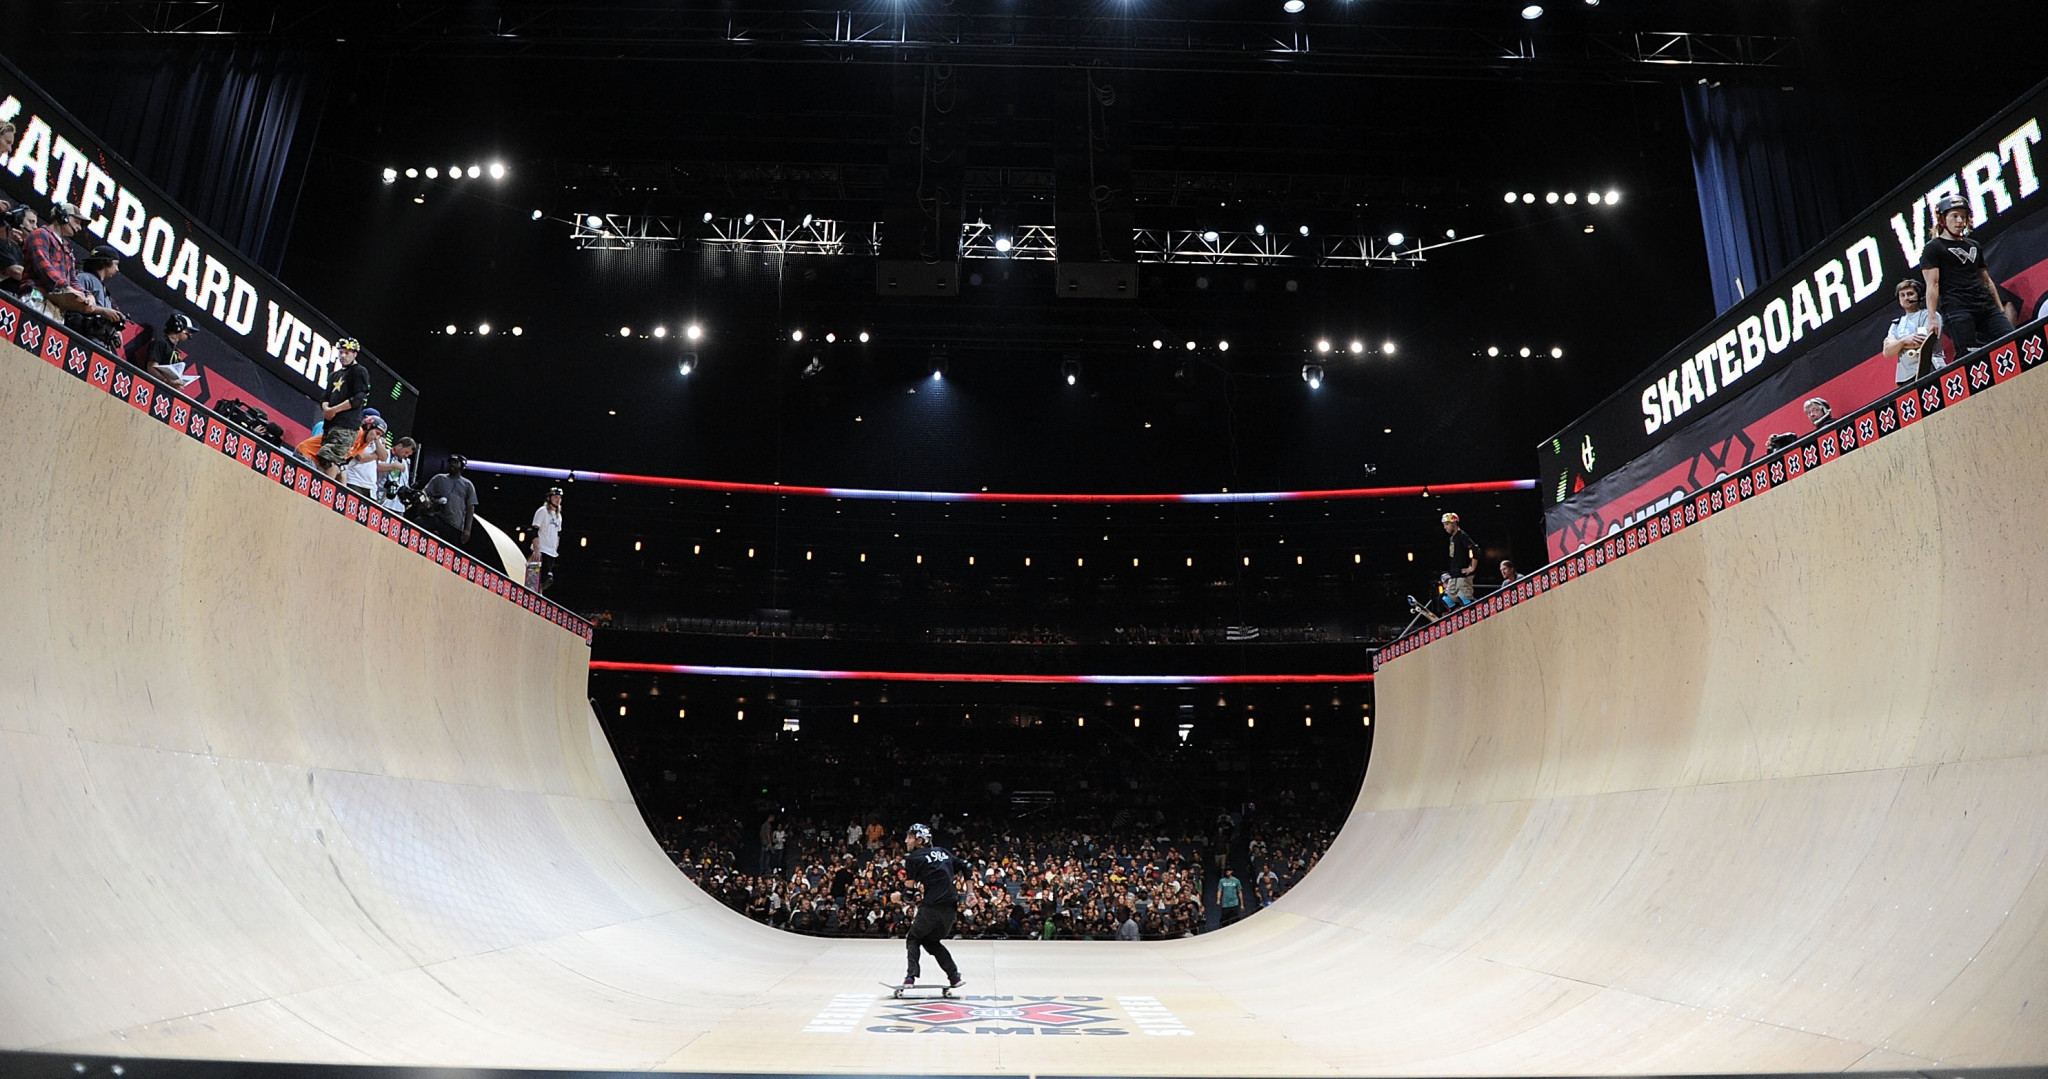 Vert skateboarding is a non-Olympic discipline ©Getty Images